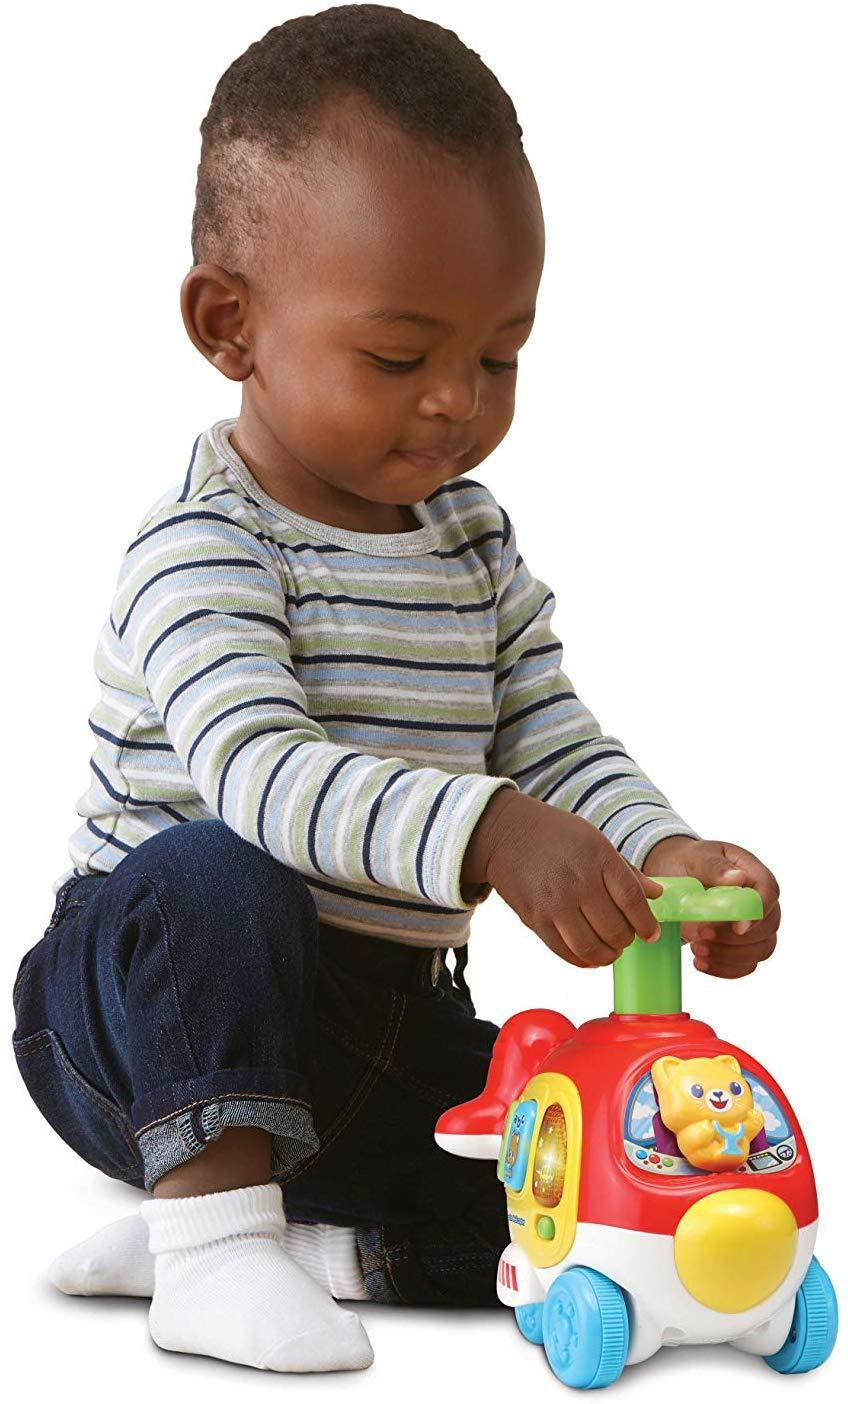 Vtech Spin & Go Helicopter Anne Claire Baby Store 